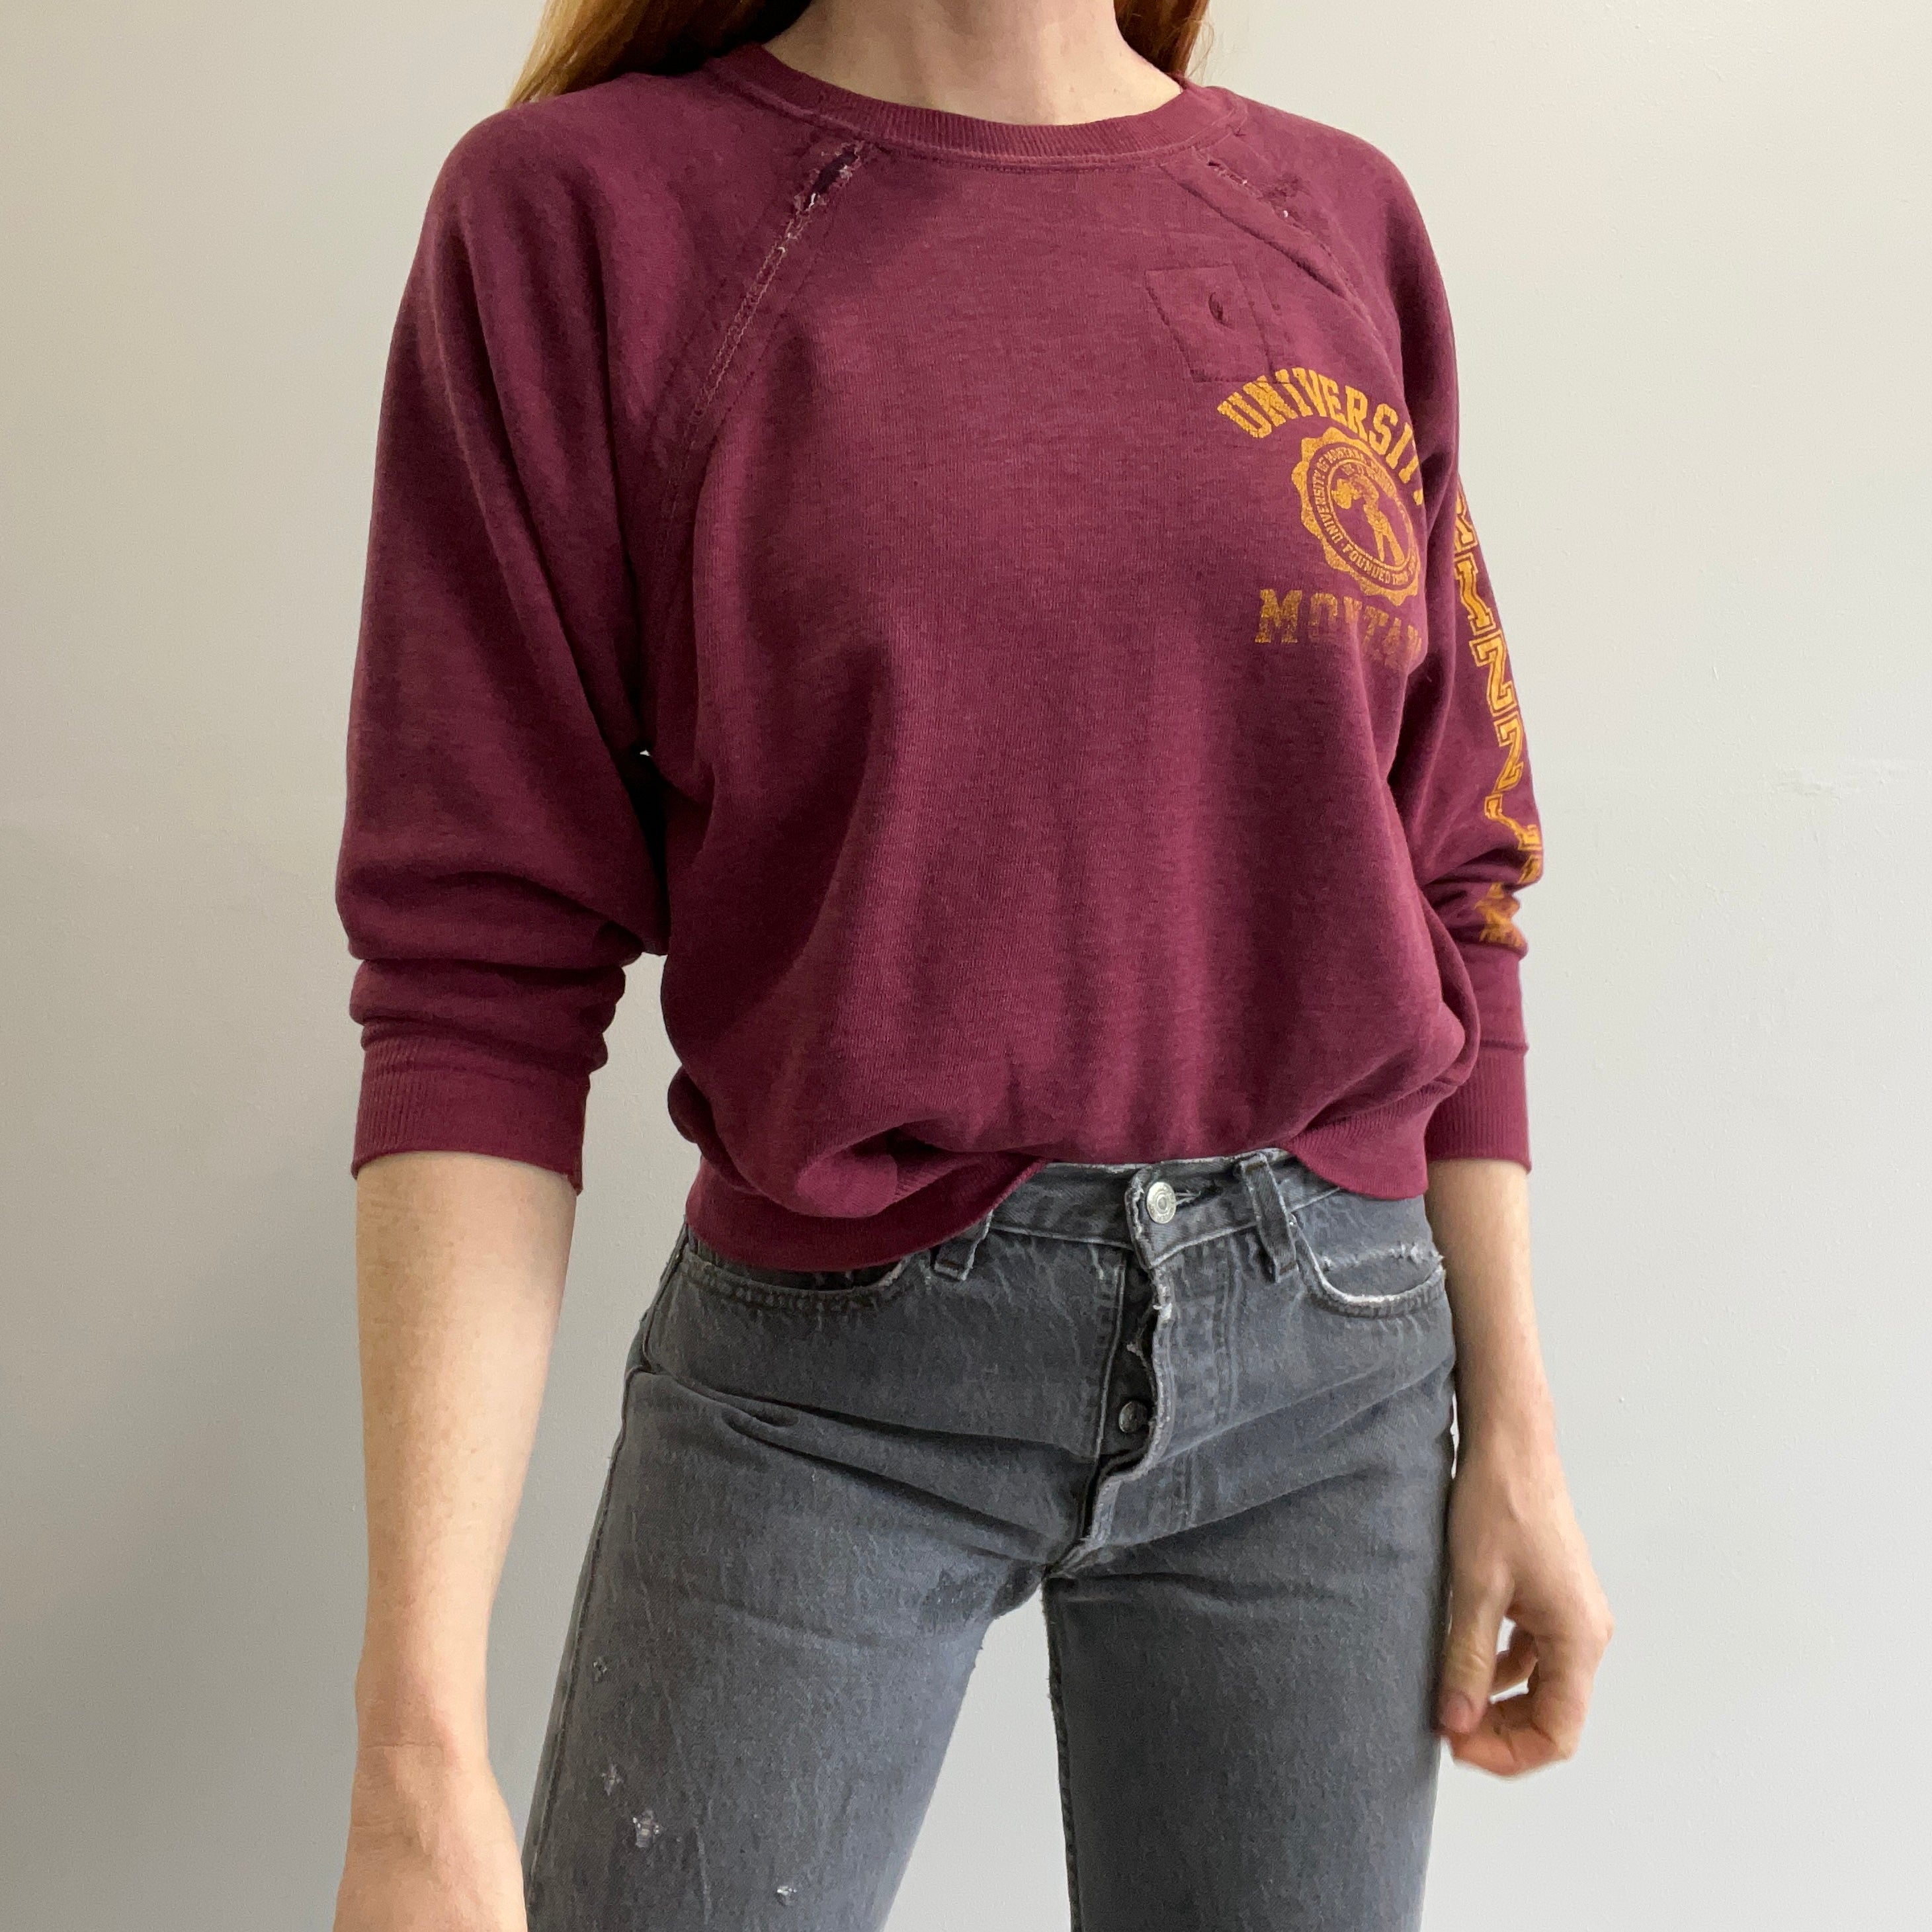 1970/80s Beat Up and Mended university of Montana Sweatshirt - Personal Collection